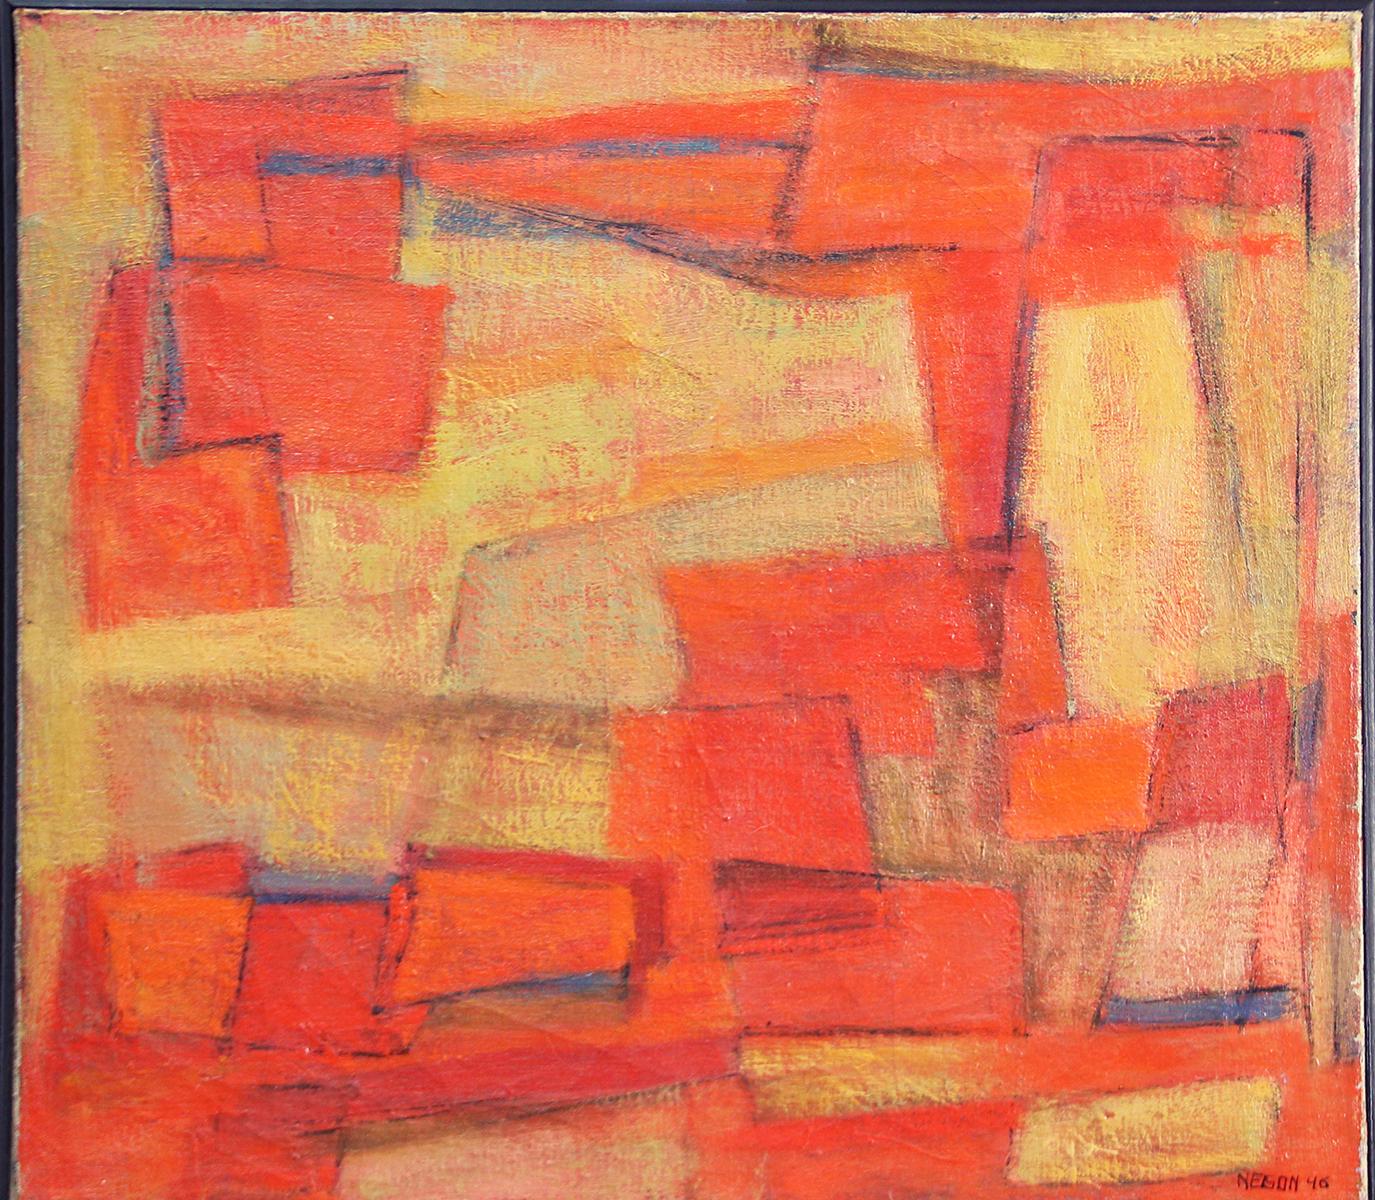 Leonard Nelson Abstract Painting - "Orange Abstract", American Modernist, Gestural Abstract, Oil on Canvas, 1946